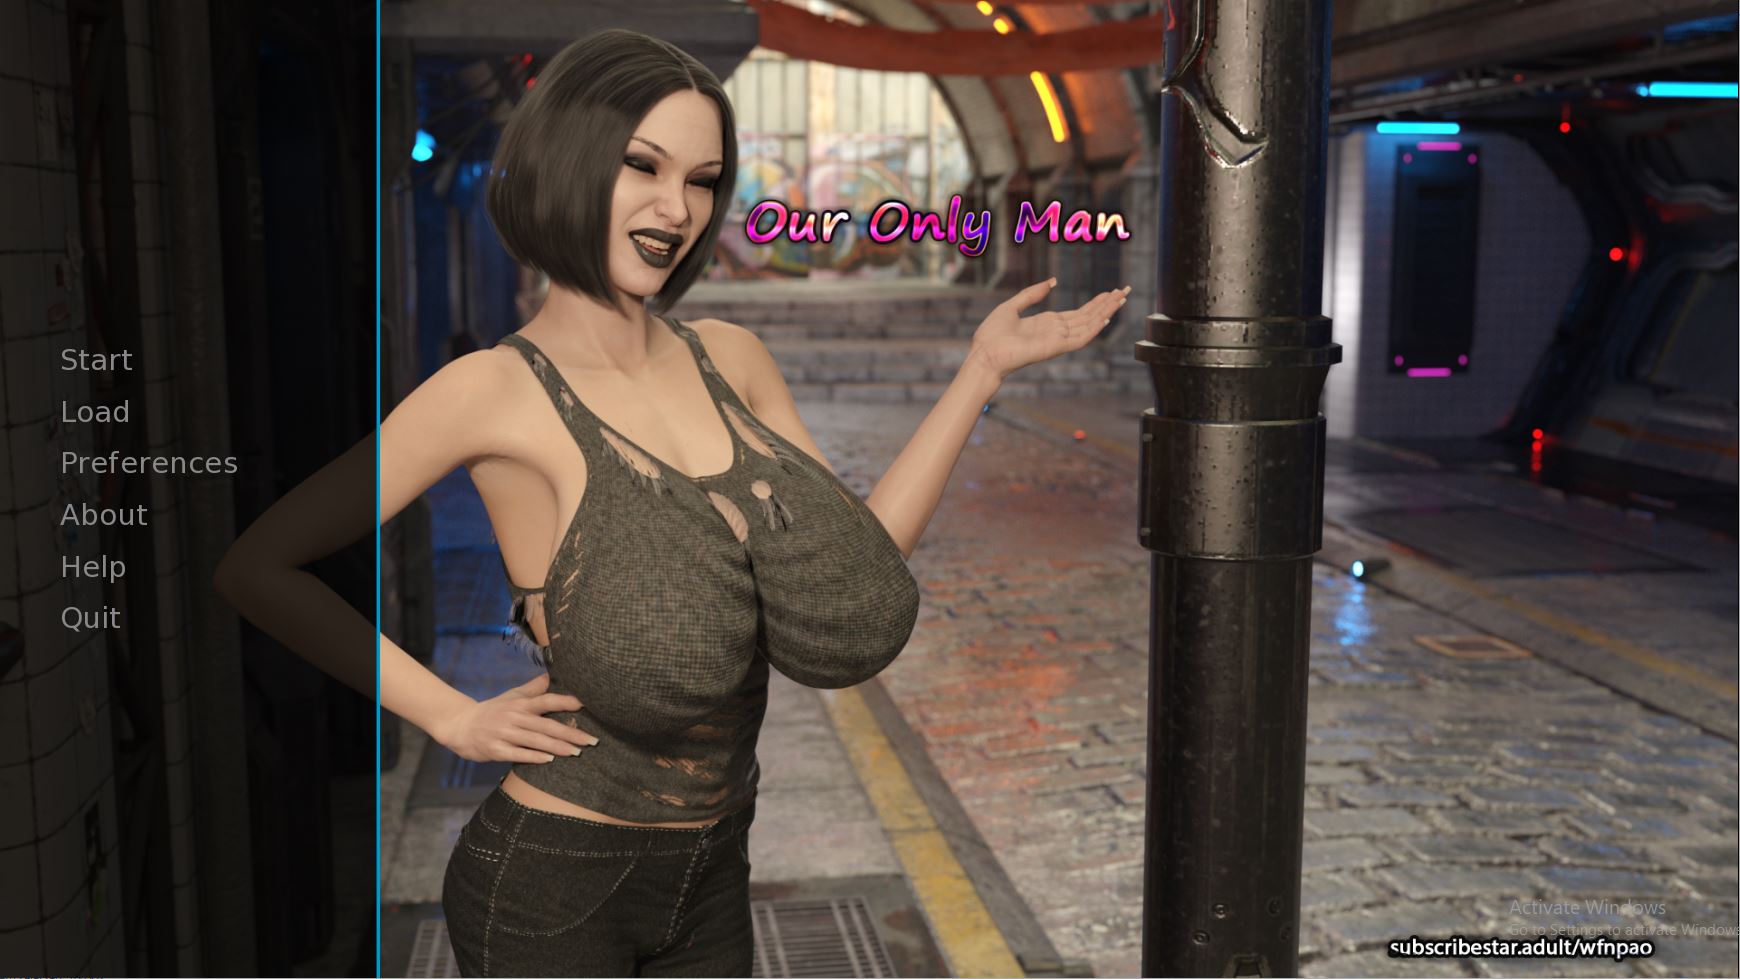 Adult Only Sex - Adultgamesworld: Free Porn Games & Sex Games Â» Our Only Man â€“ New Version  0.17 [WFNPaO]